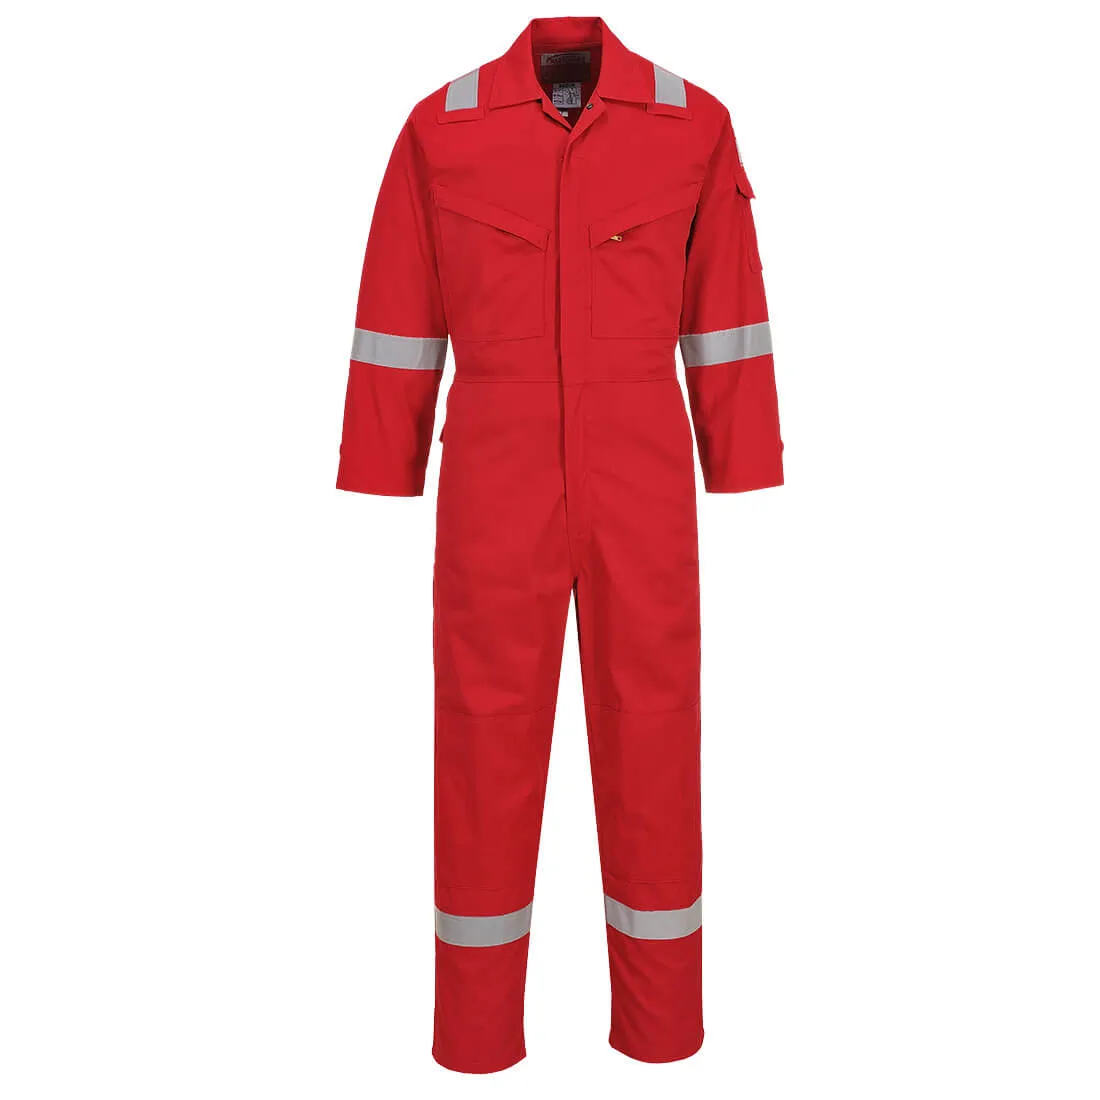 Biz Flame Mens Flame Resistant Lightweight Antistatic Coverall - Red, Extra Large, 32"